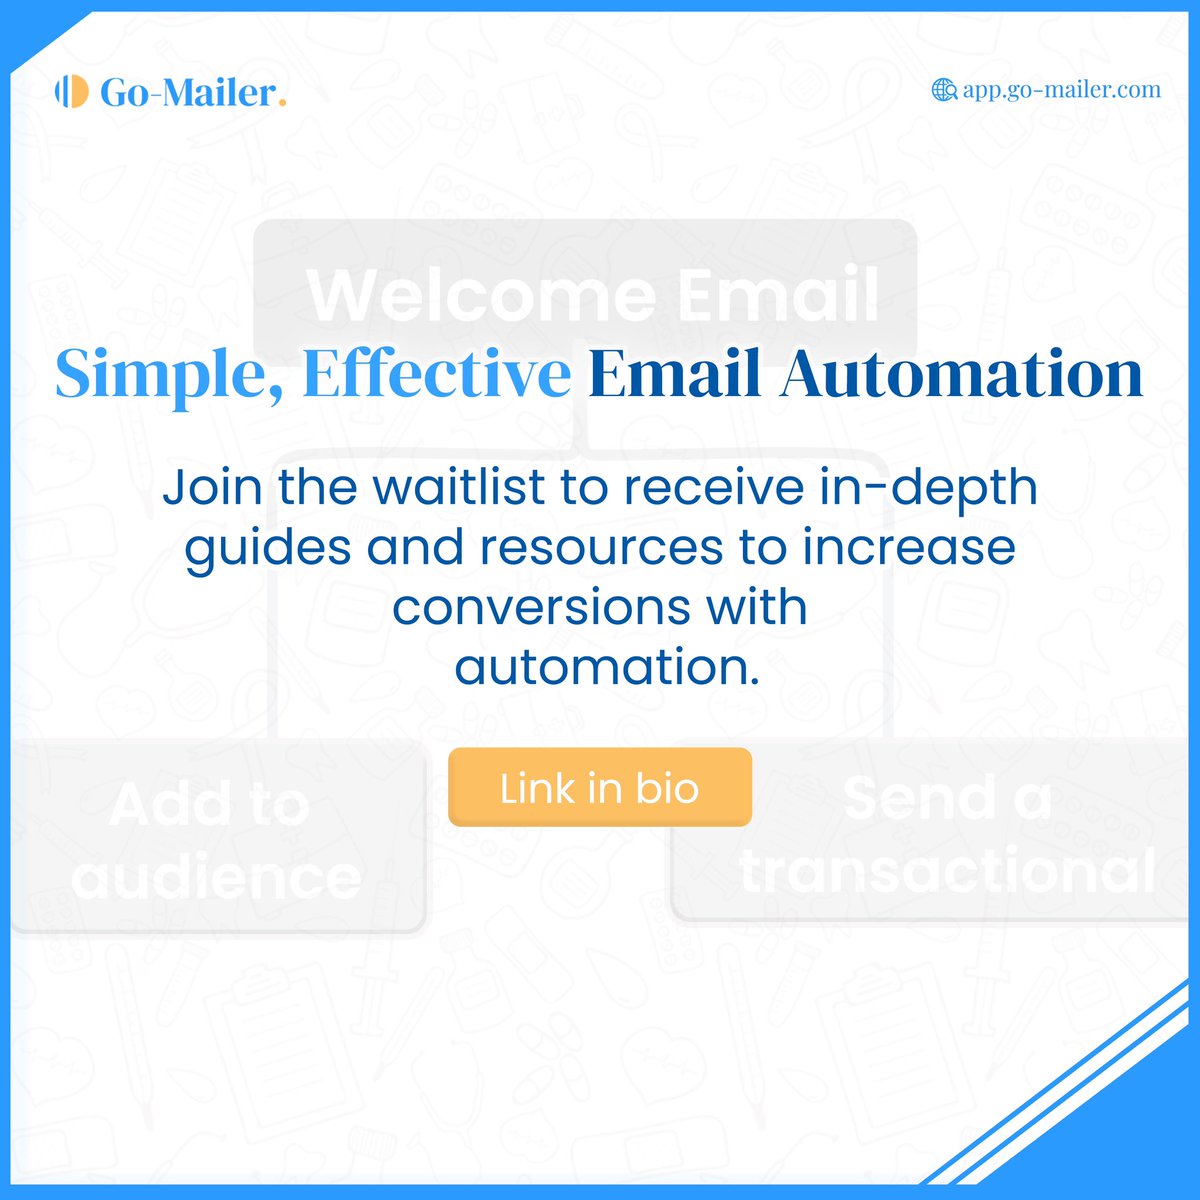 Automations feature is finally going live on Go-Mailer and we are excited to share resourceful guides on how to increase conversions with automation. 

Send a dm to join the waitlist today.
.
#gomailer #emailautomationtips #gomailerautomation #emailmarketing #emailsoftware